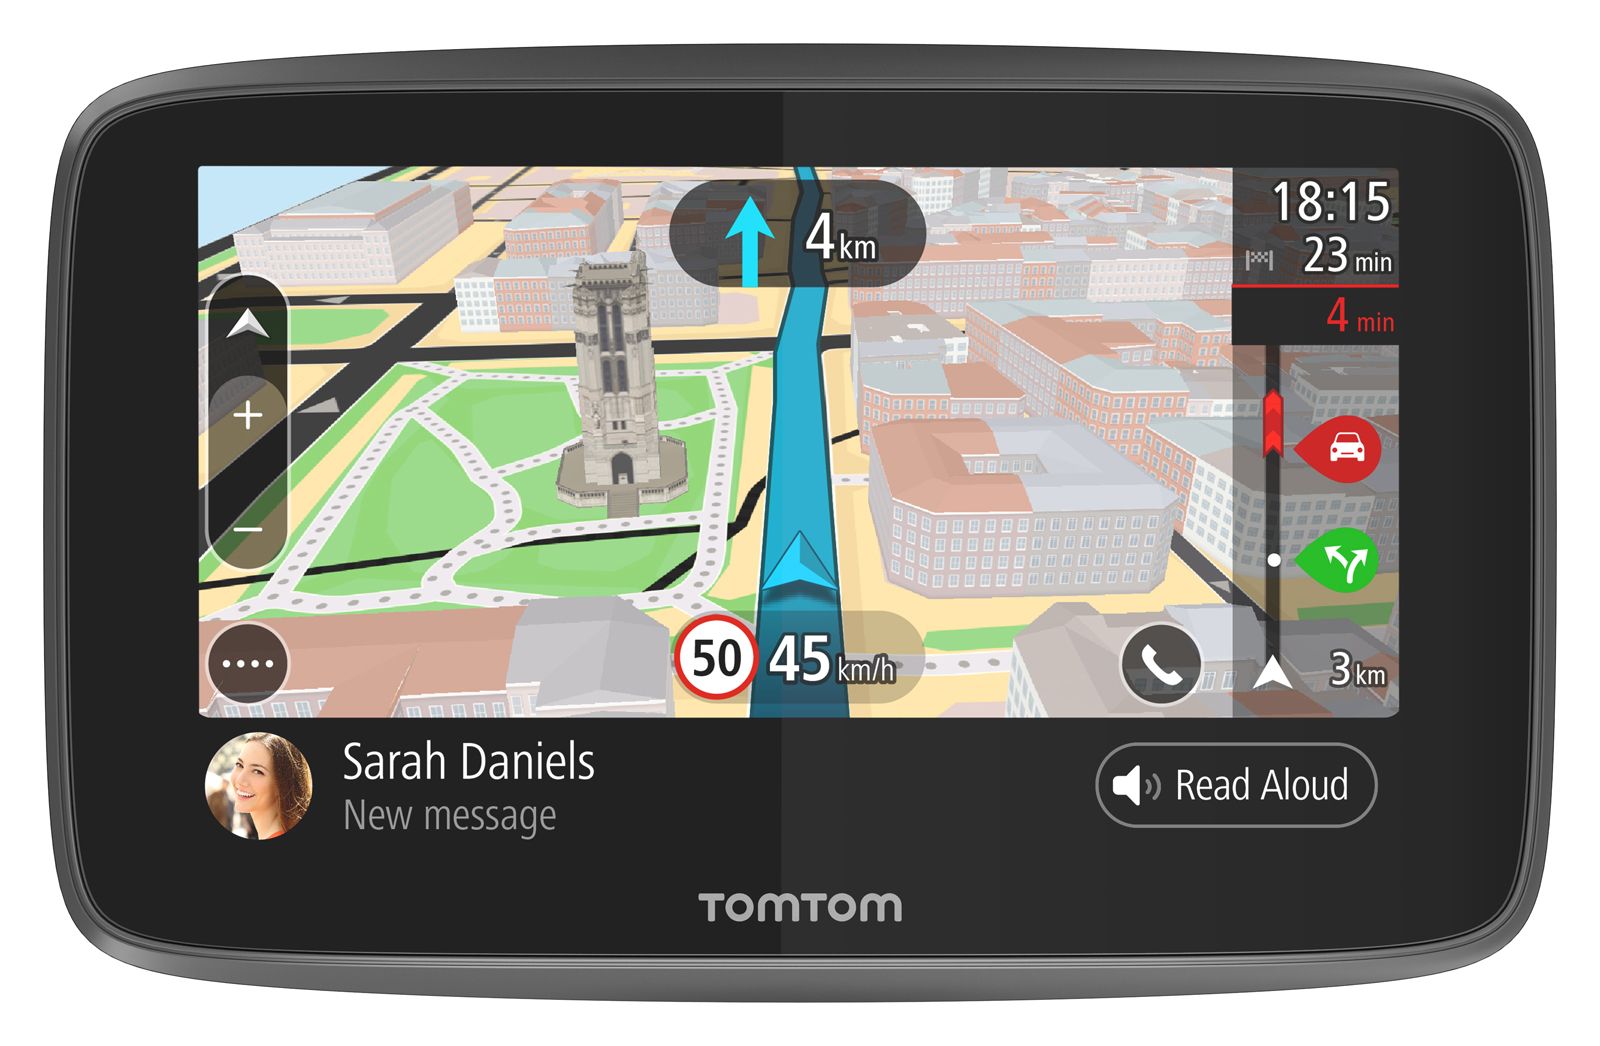 tomtom go adds wi fi smartphone notifications and siri google cortana voice controls image 2